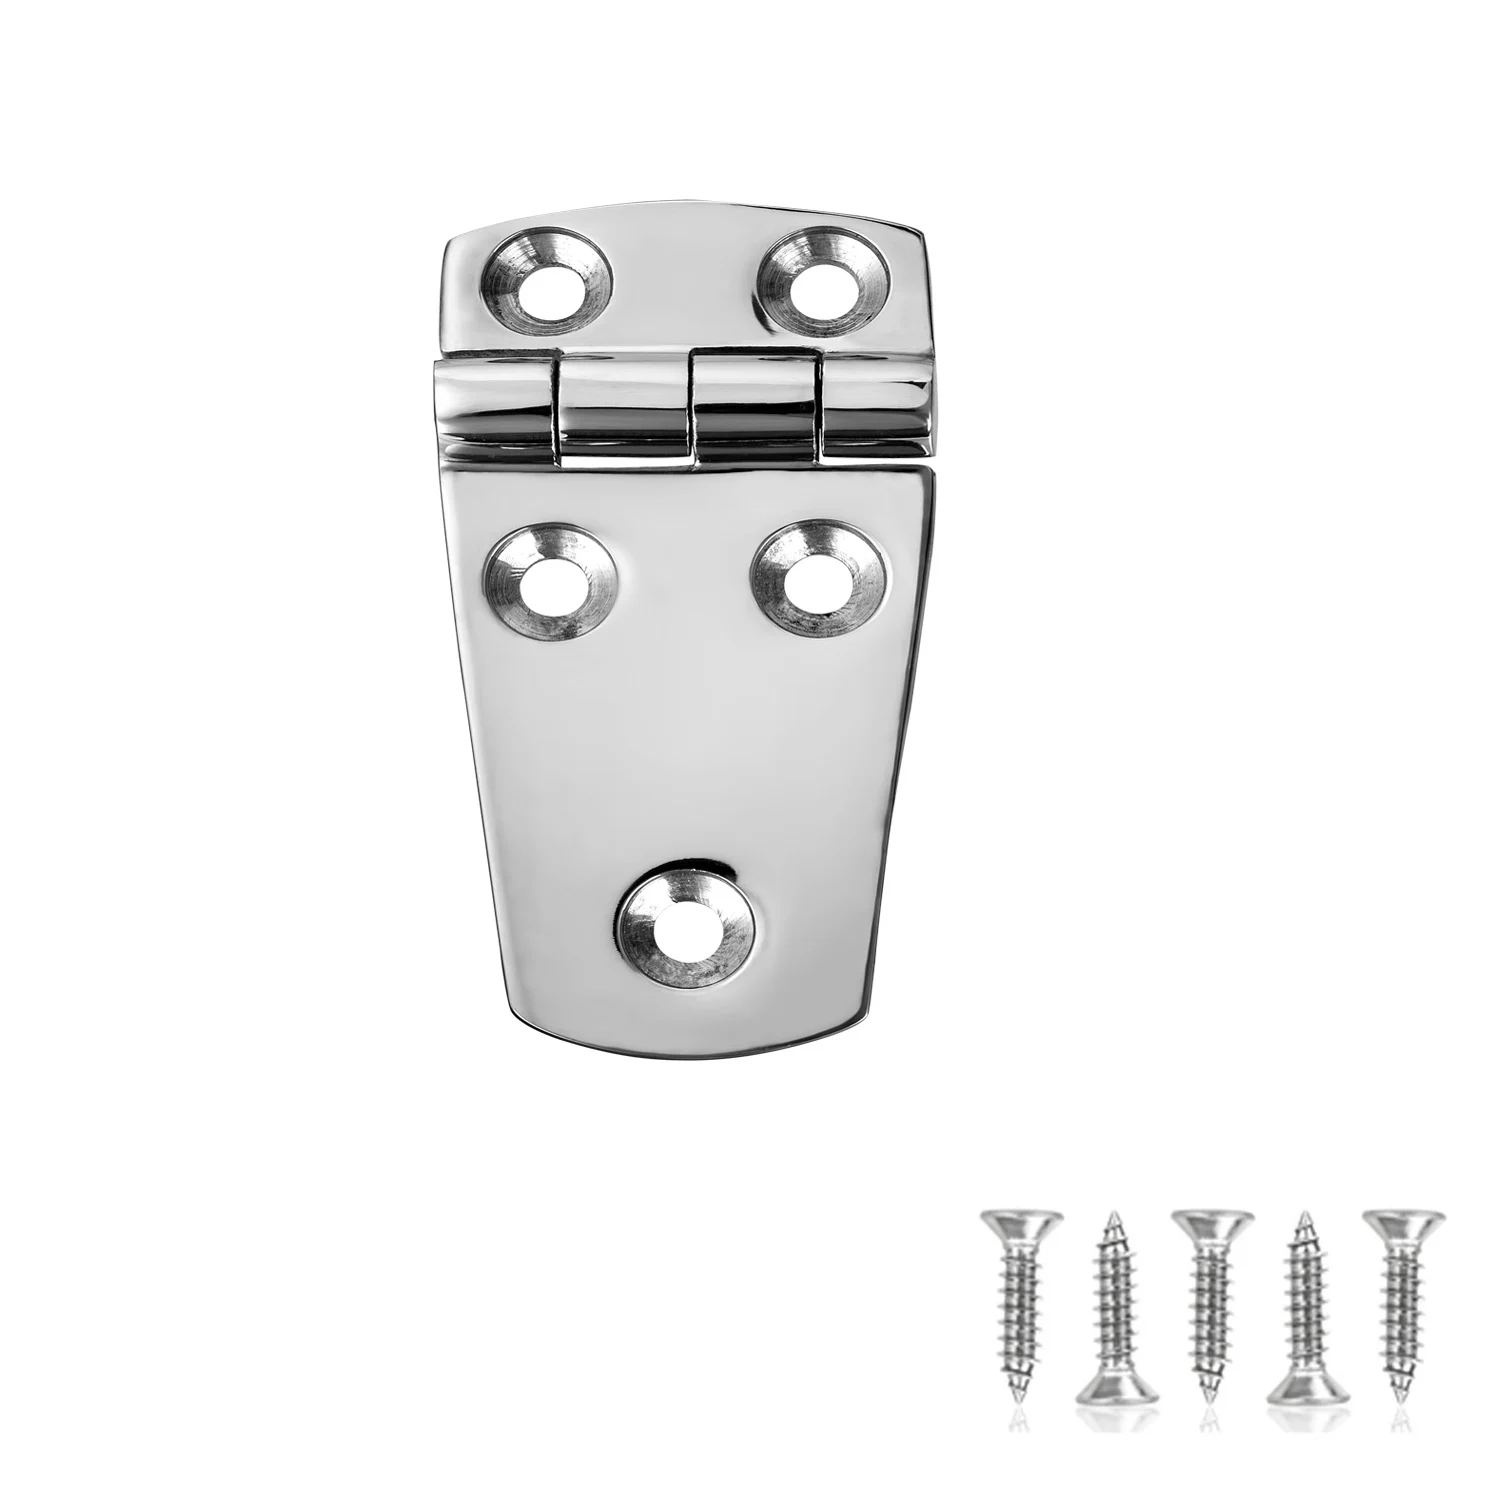 Marine Boat Hatch Hinges Stainless Steel, 3 Inch X 1.5 Inches(76 X 38MM) 5 Holes, No Noise, Heavy Duty 316 Ss with Screws m3 stainless steel screws allen hex socket head screw bolt fastener m3 3 4 5 6 8 10 12mm 16mm 20mm 25mm 30mm 32mm 35mm 38mm 40mm